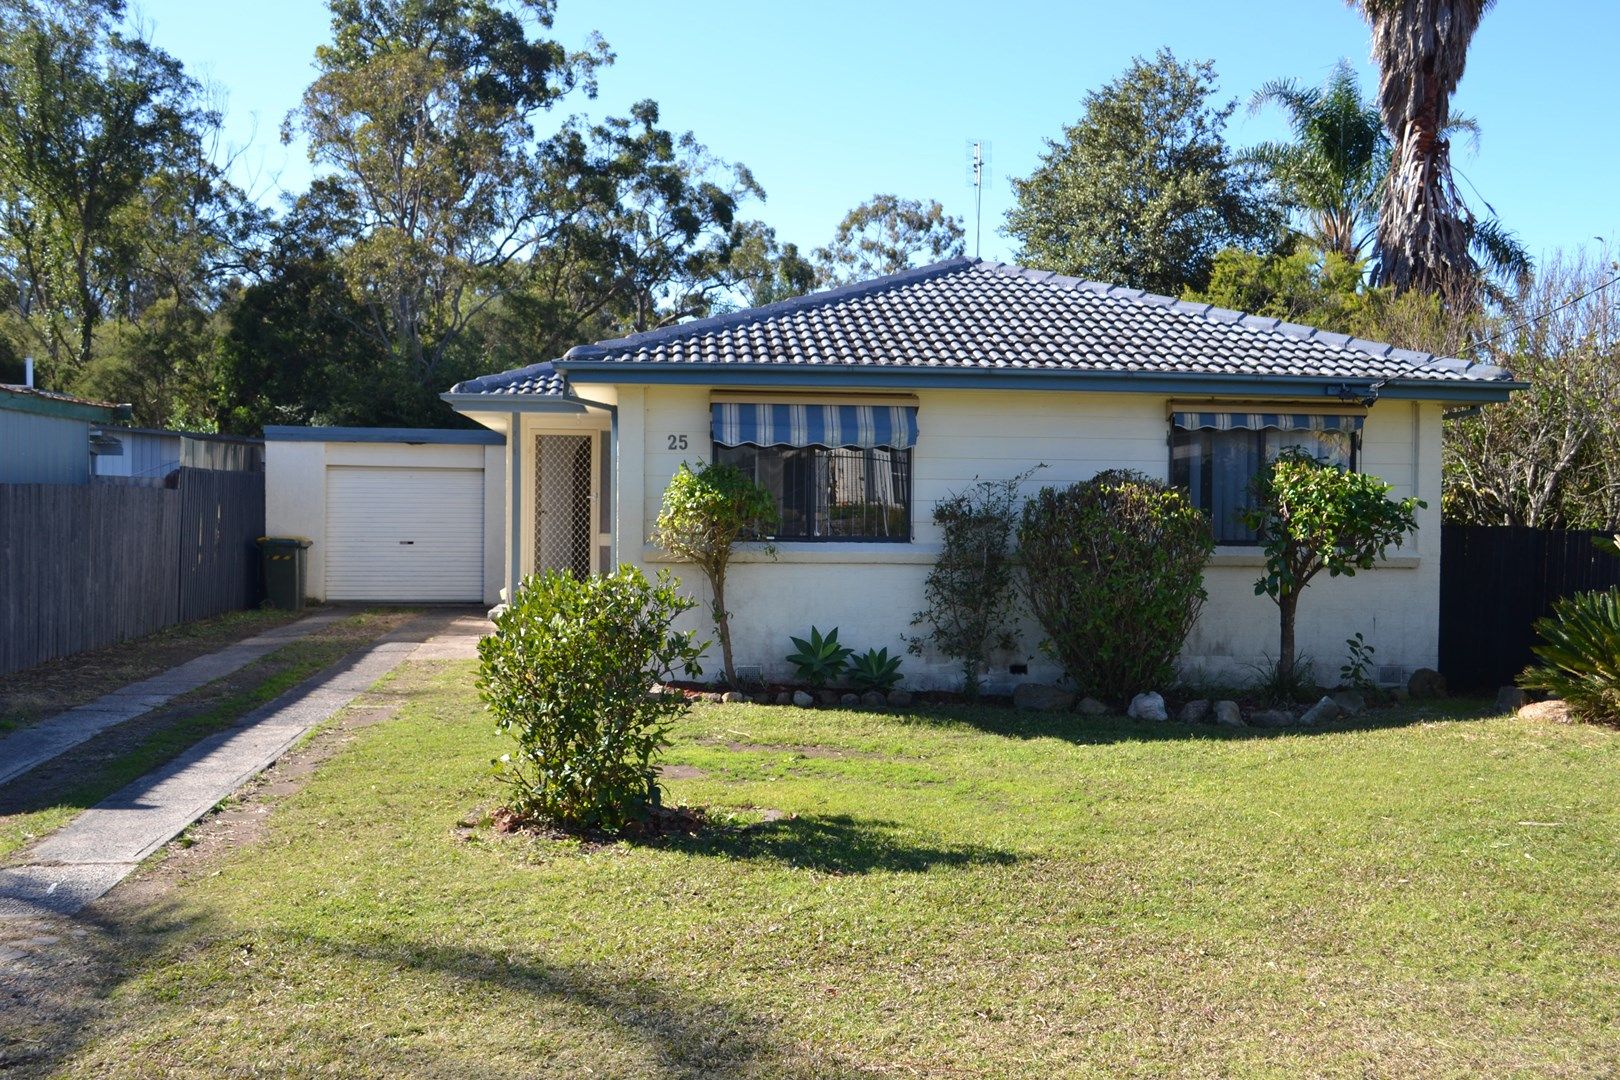 25 Deaves Road, Cooranbong NSW 2265, Image 0